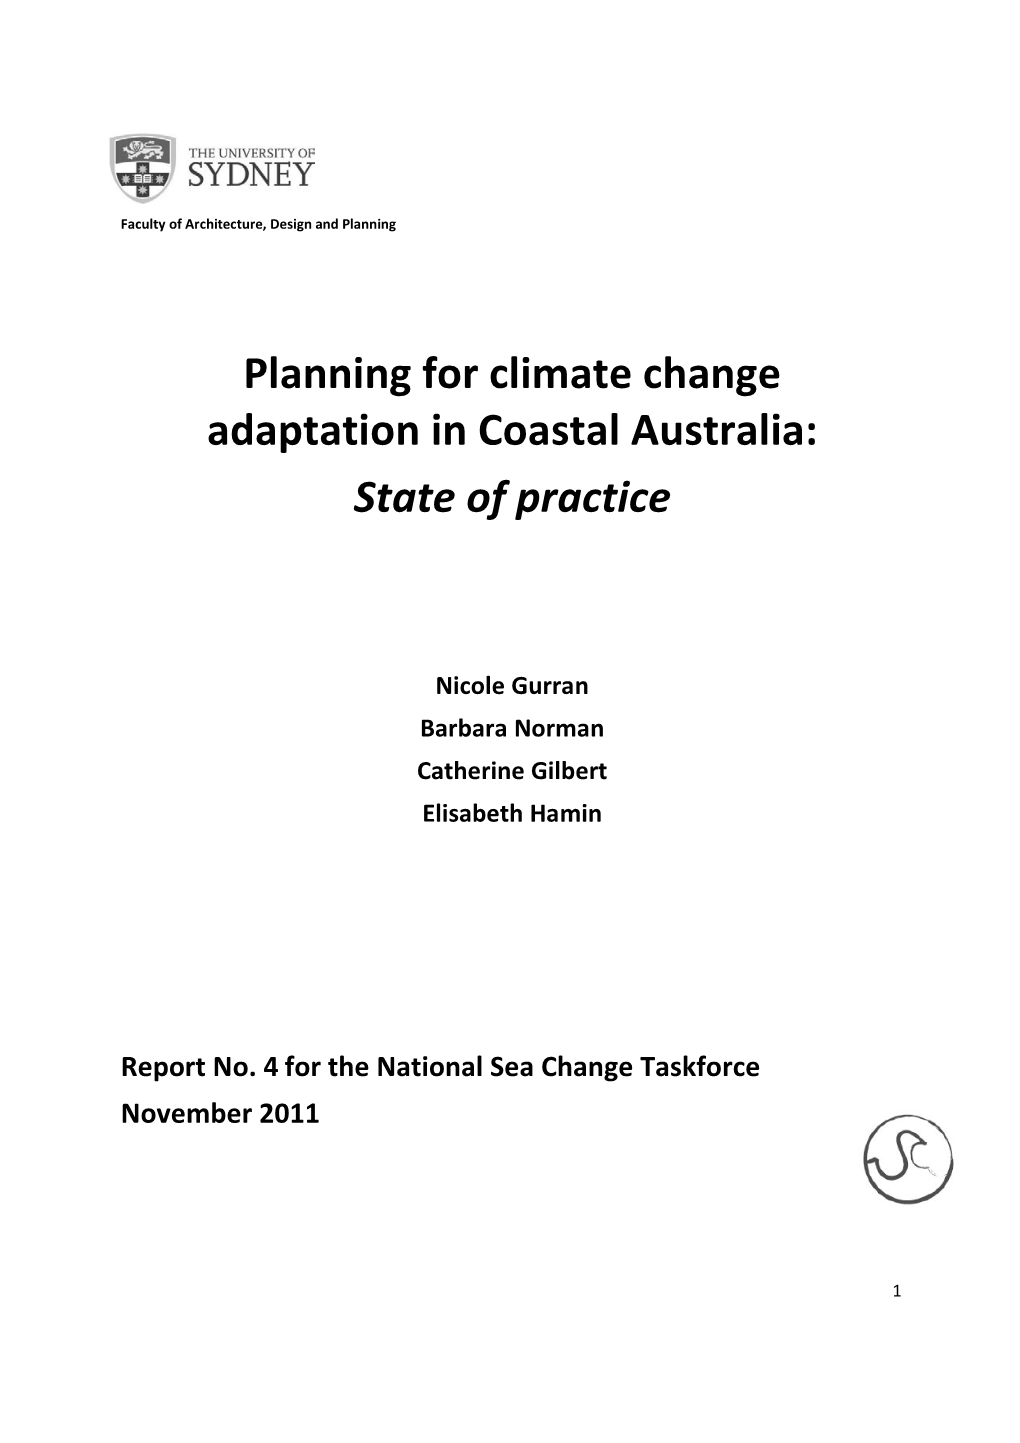 Planning for Climate Change Adaptation in Coastal Australia: State of Practice, Report No